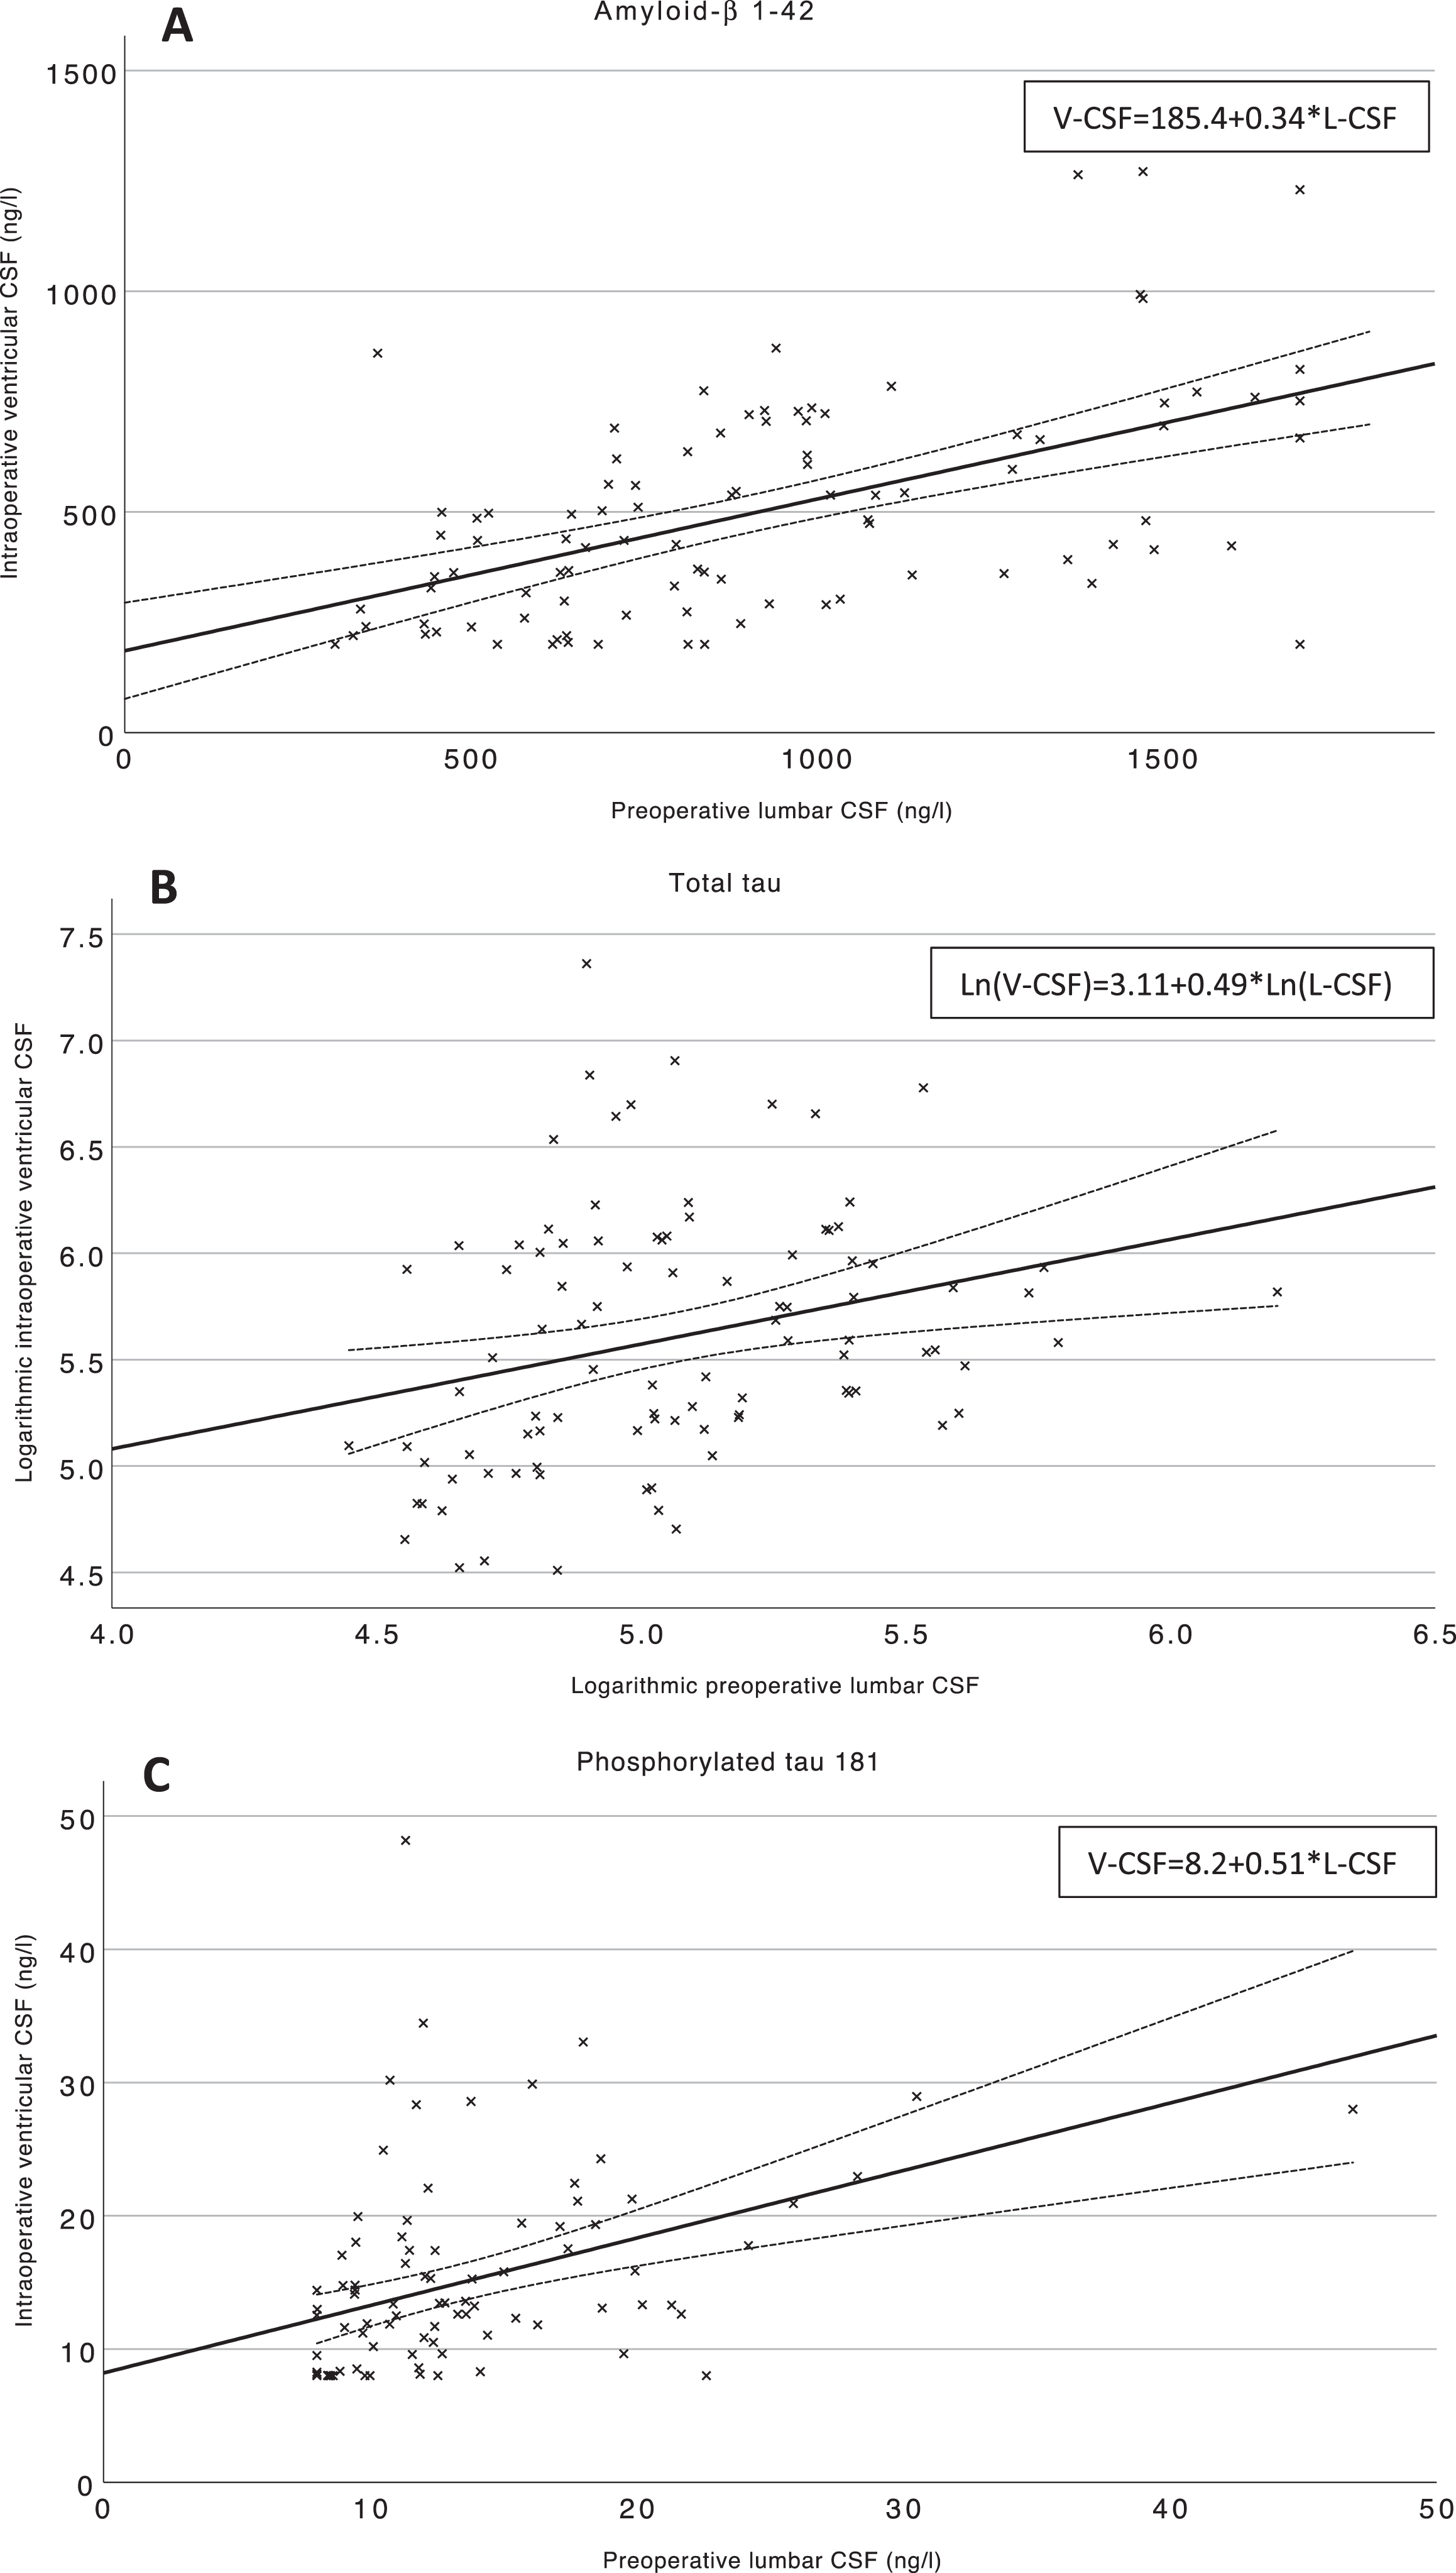 Scatterplots of pre- and intraoperative Aβ42, T-tau, and P-tau181 in L- and V-CSF. Scatterplots of V- and L-CSF values of the biomarkers Aβ42 (A), T-tau (B), and P-tau181 (C) and linear trendlines are illustrating the linear dependency of intraoperative V- and preoperative L-CSF. Mean confidence intervals (95%) are drawn for linear trendlines. Regression equations of the linear univariate regression models are presented at upper right corner of the figure. T-tau values are presented at natural logarithmic scale due the non-normally distributed values. Aβ42, amyloid-β 1–42; T-tau, total tau protein; P-Tau181, hyperphosphorylated tau at threonine 181; V-CSF, ventricular cerebrospinal fluid; L-CSF lumbar cerebrospinal fluid; Ln, natural logarithm transferred variable; R2, Coefficient of determination.